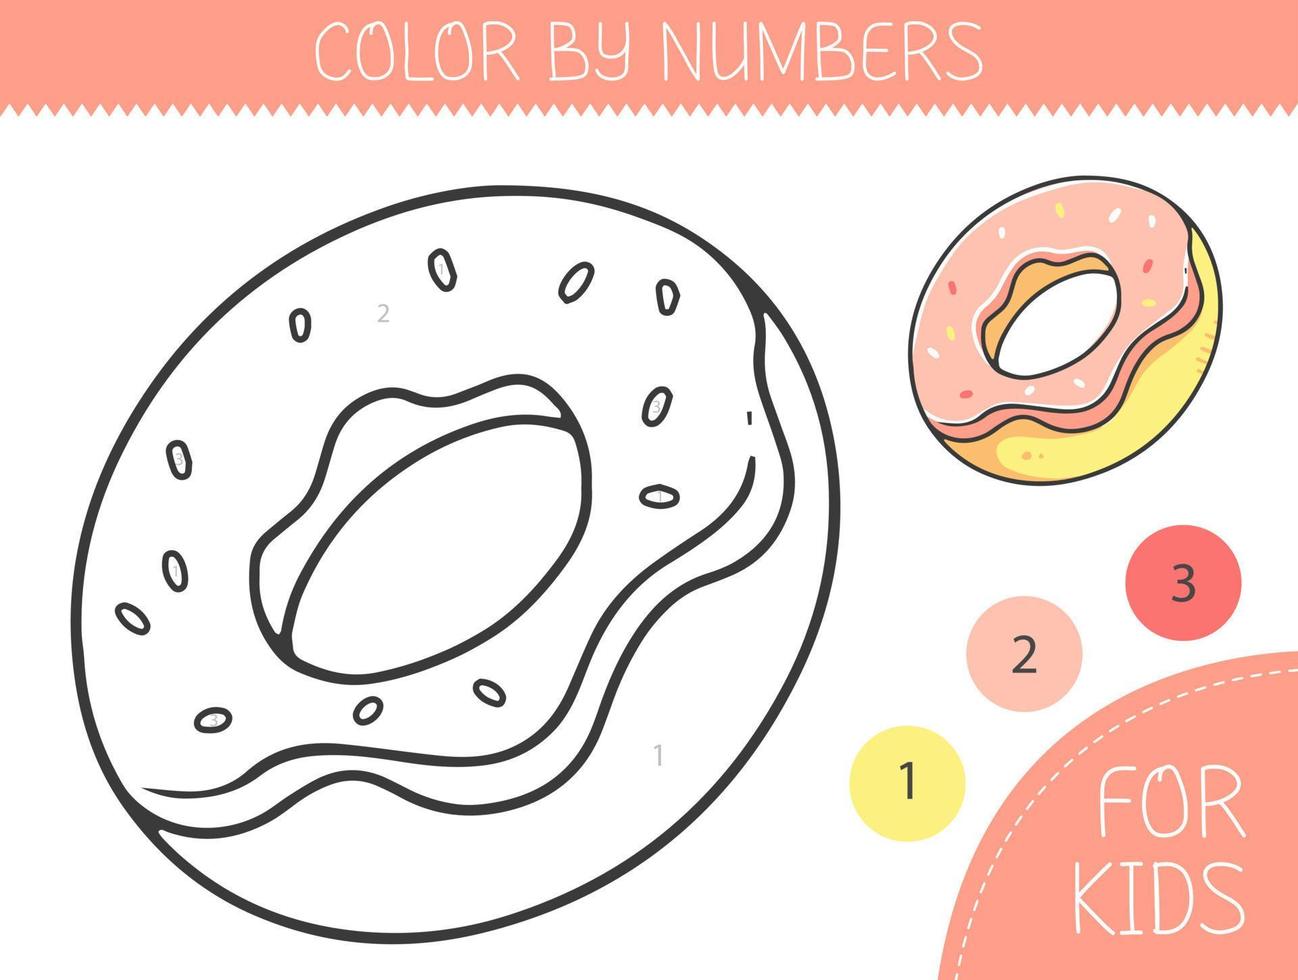 Color by numbers coloring page for kids with donut. Coloring book with cute cartoon donut with an example for coloring. Monochrome and color versions. Vector illustration.